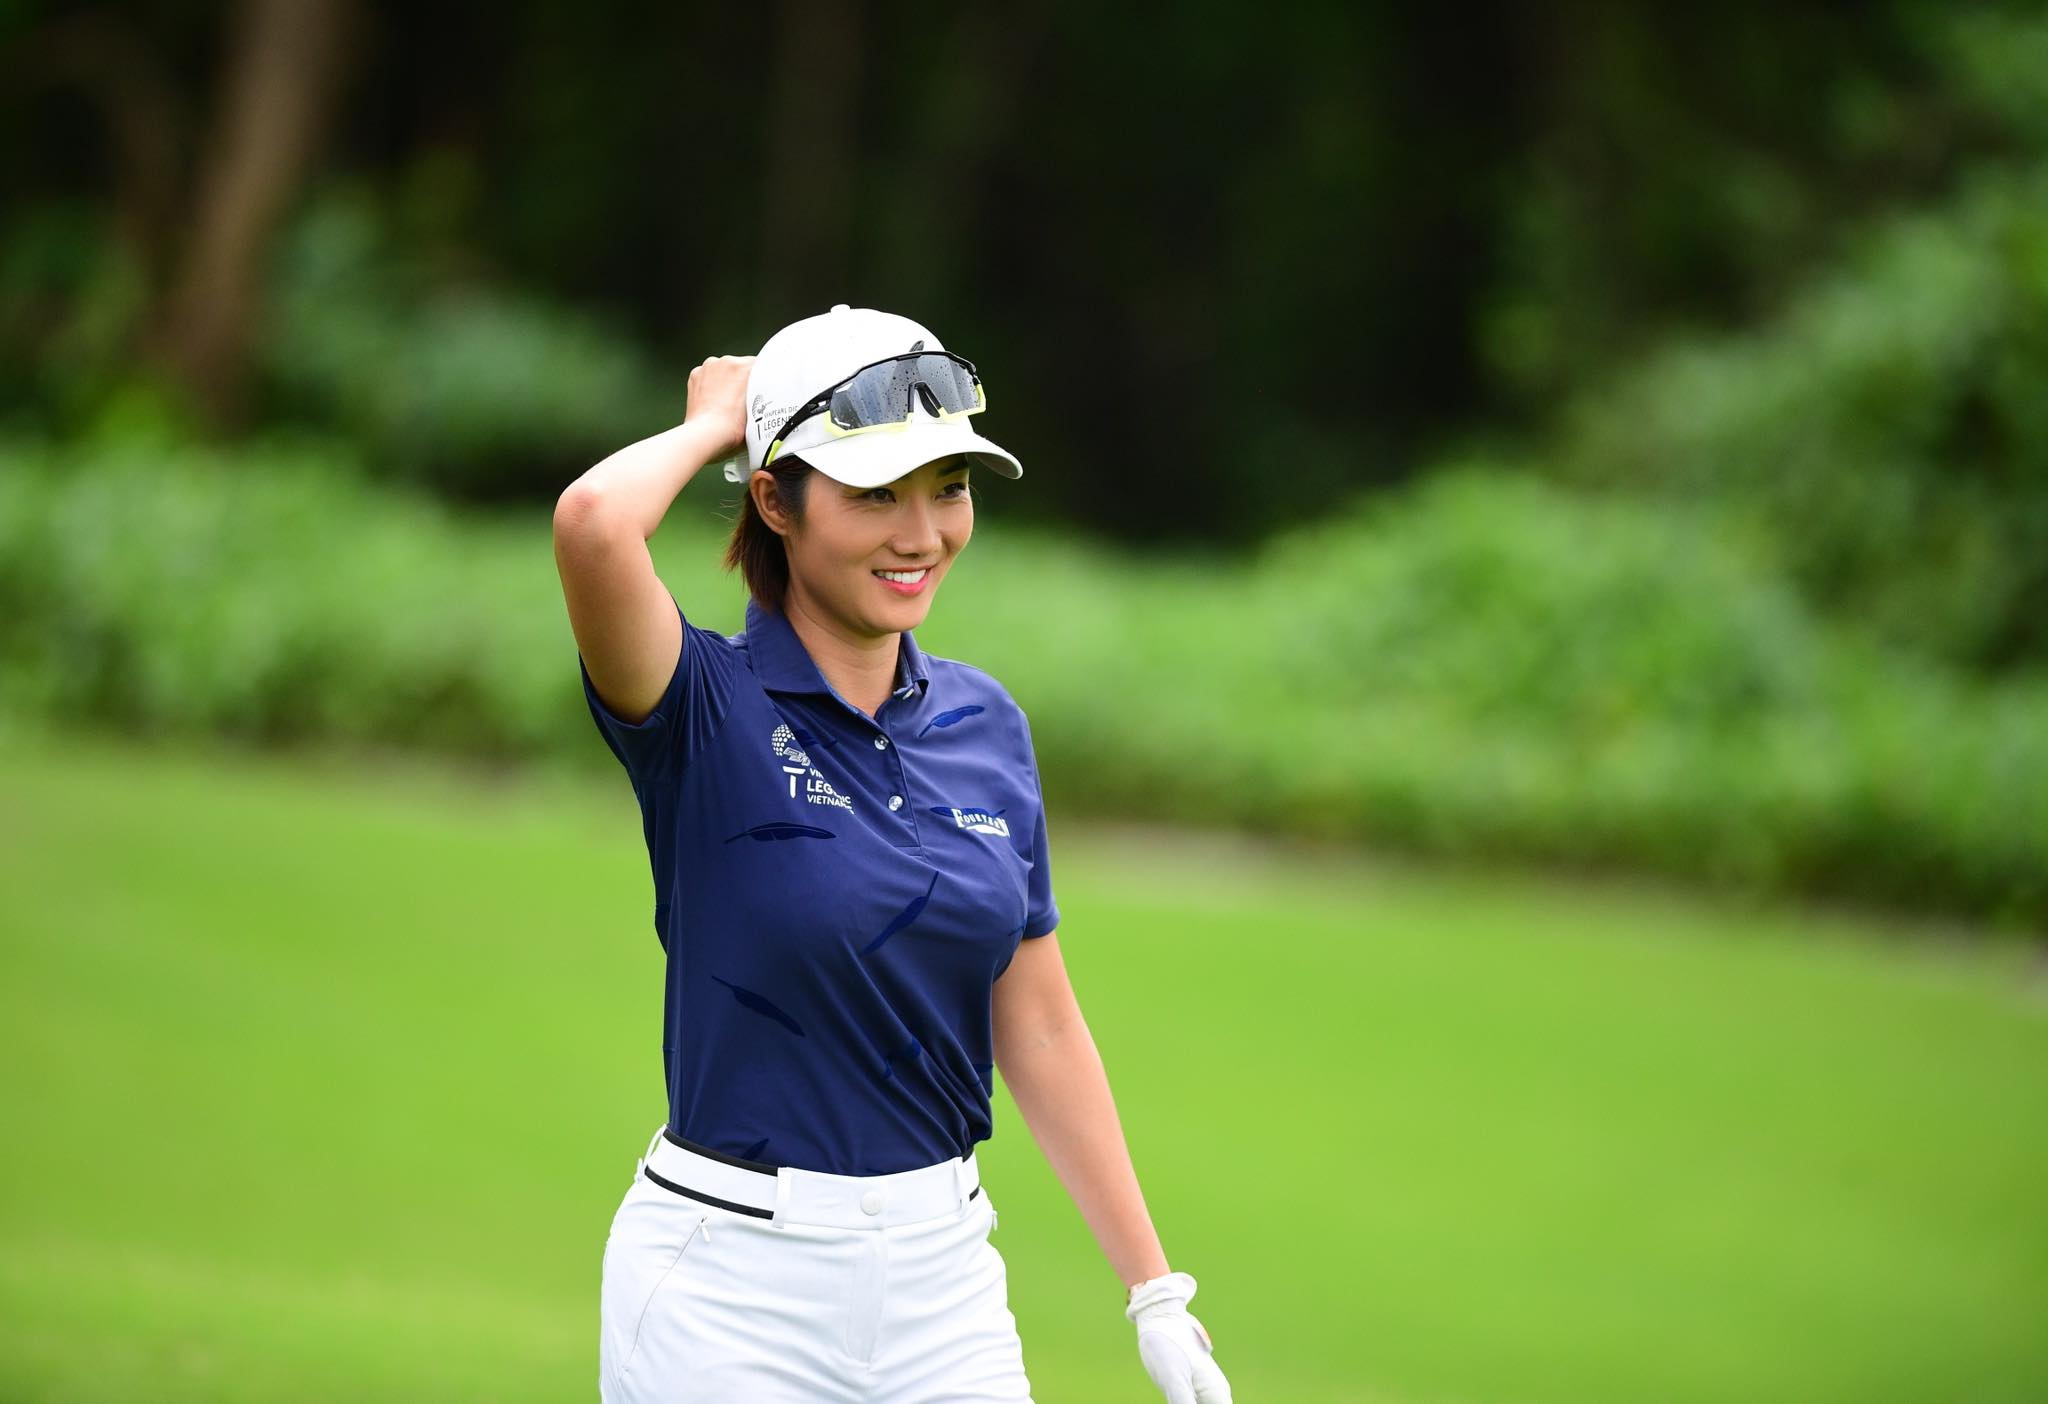 Golfer Nguyễn Gia Bảo always has a positive spirit when participating in the Legends Tour.